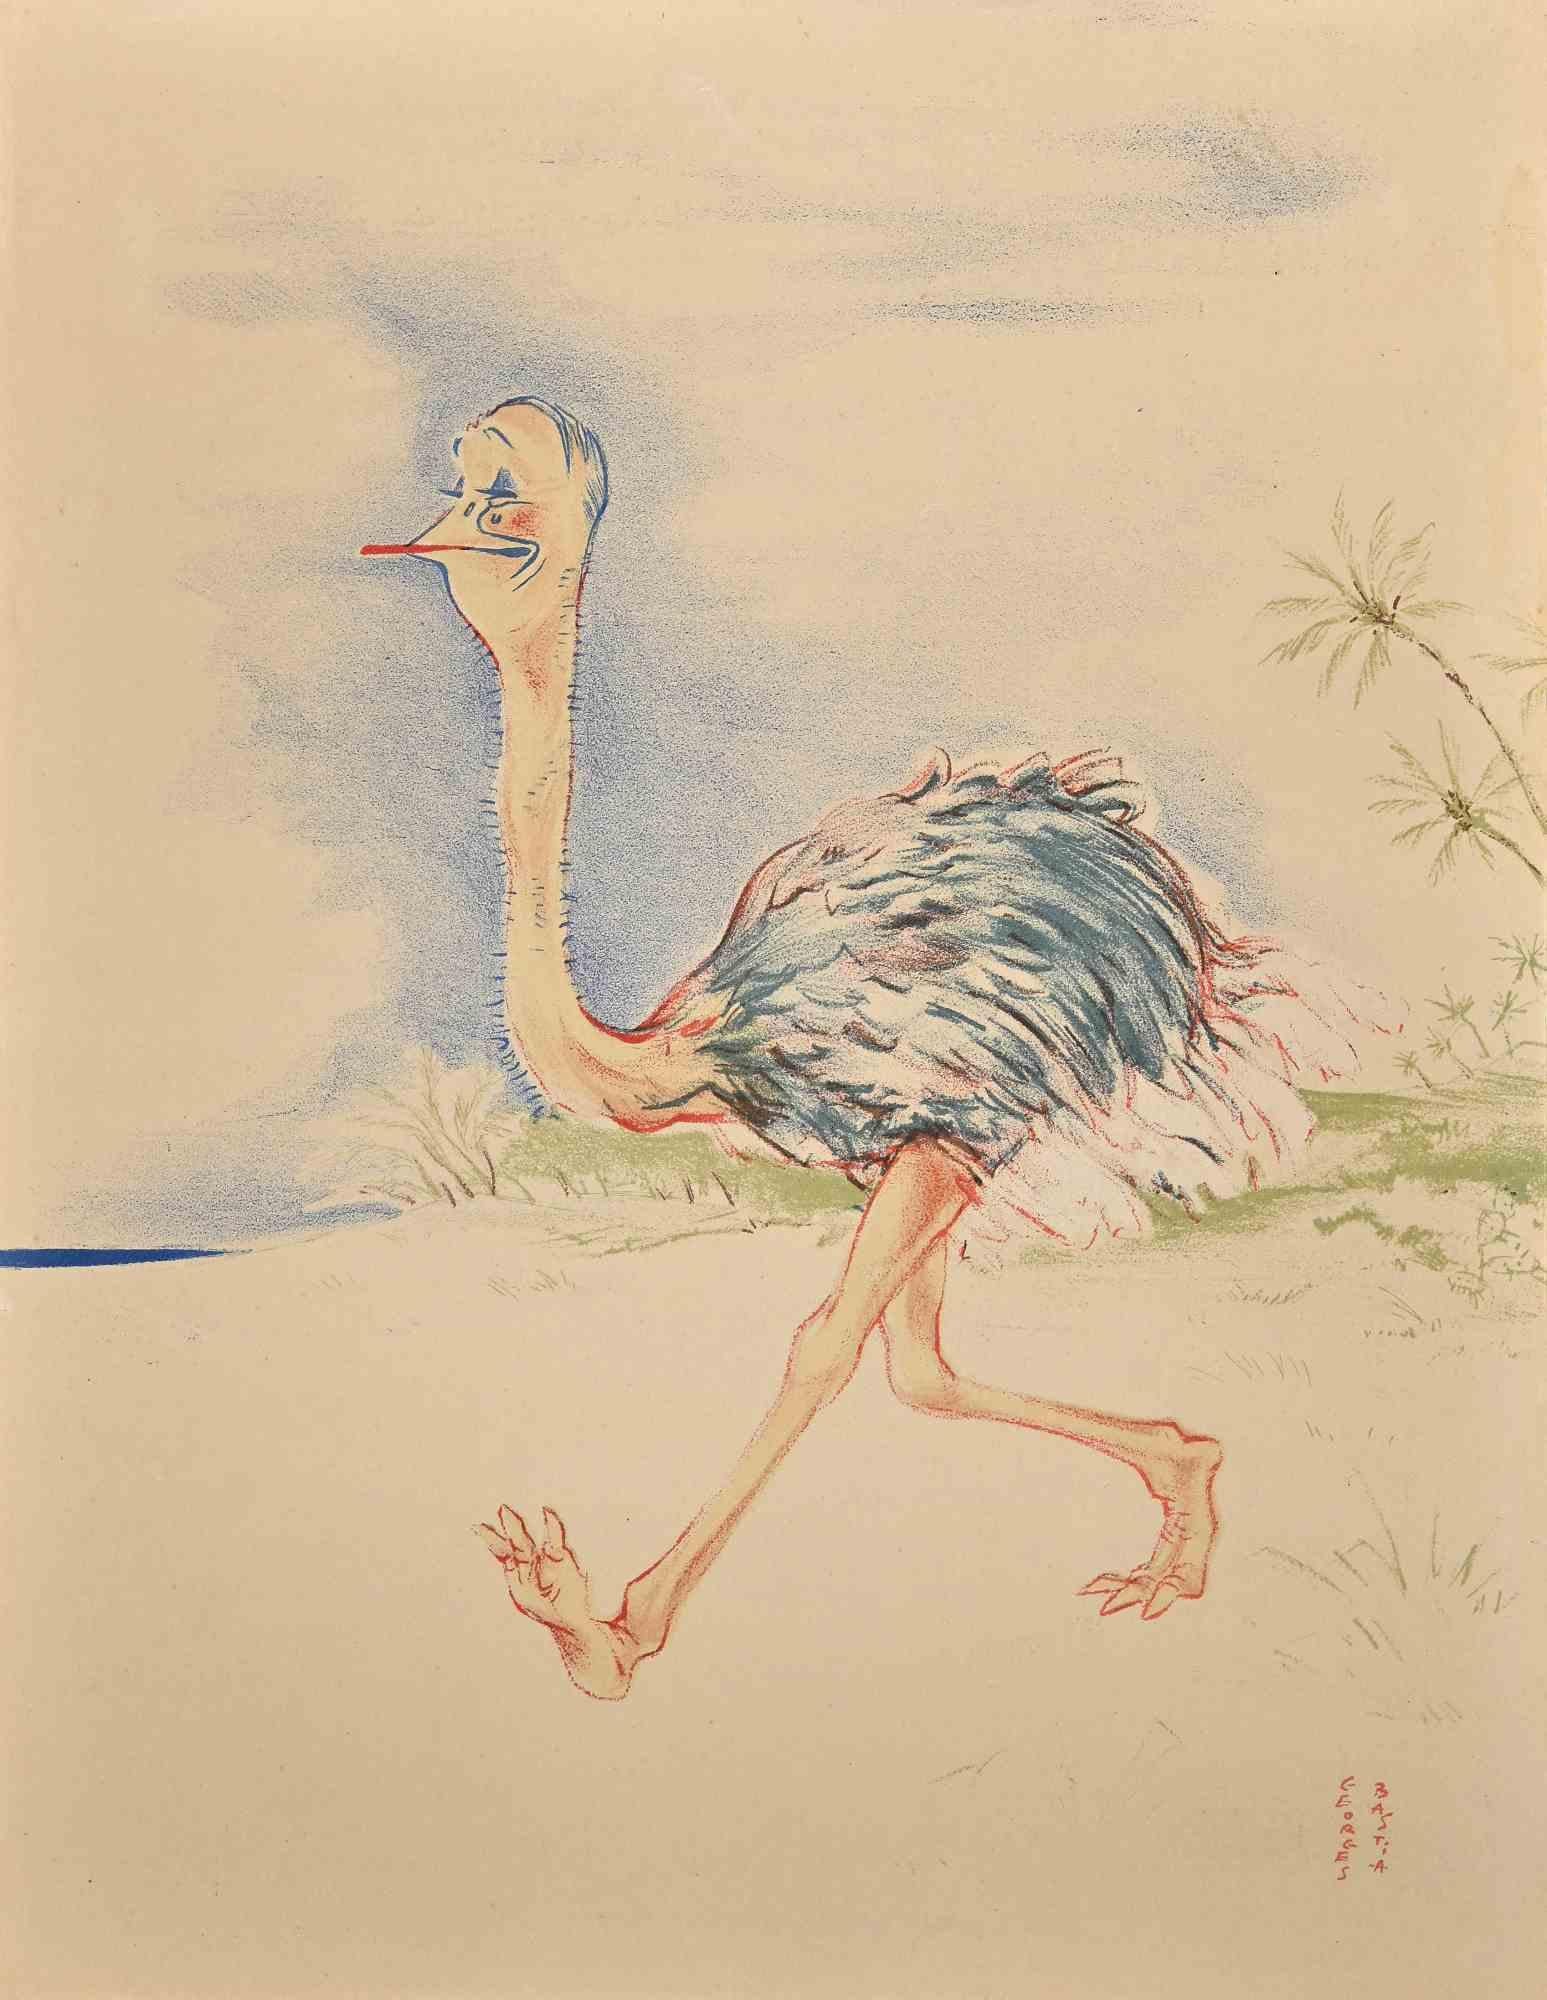 Ostrich - Original Lithograph by Georges Bastia - 1950s